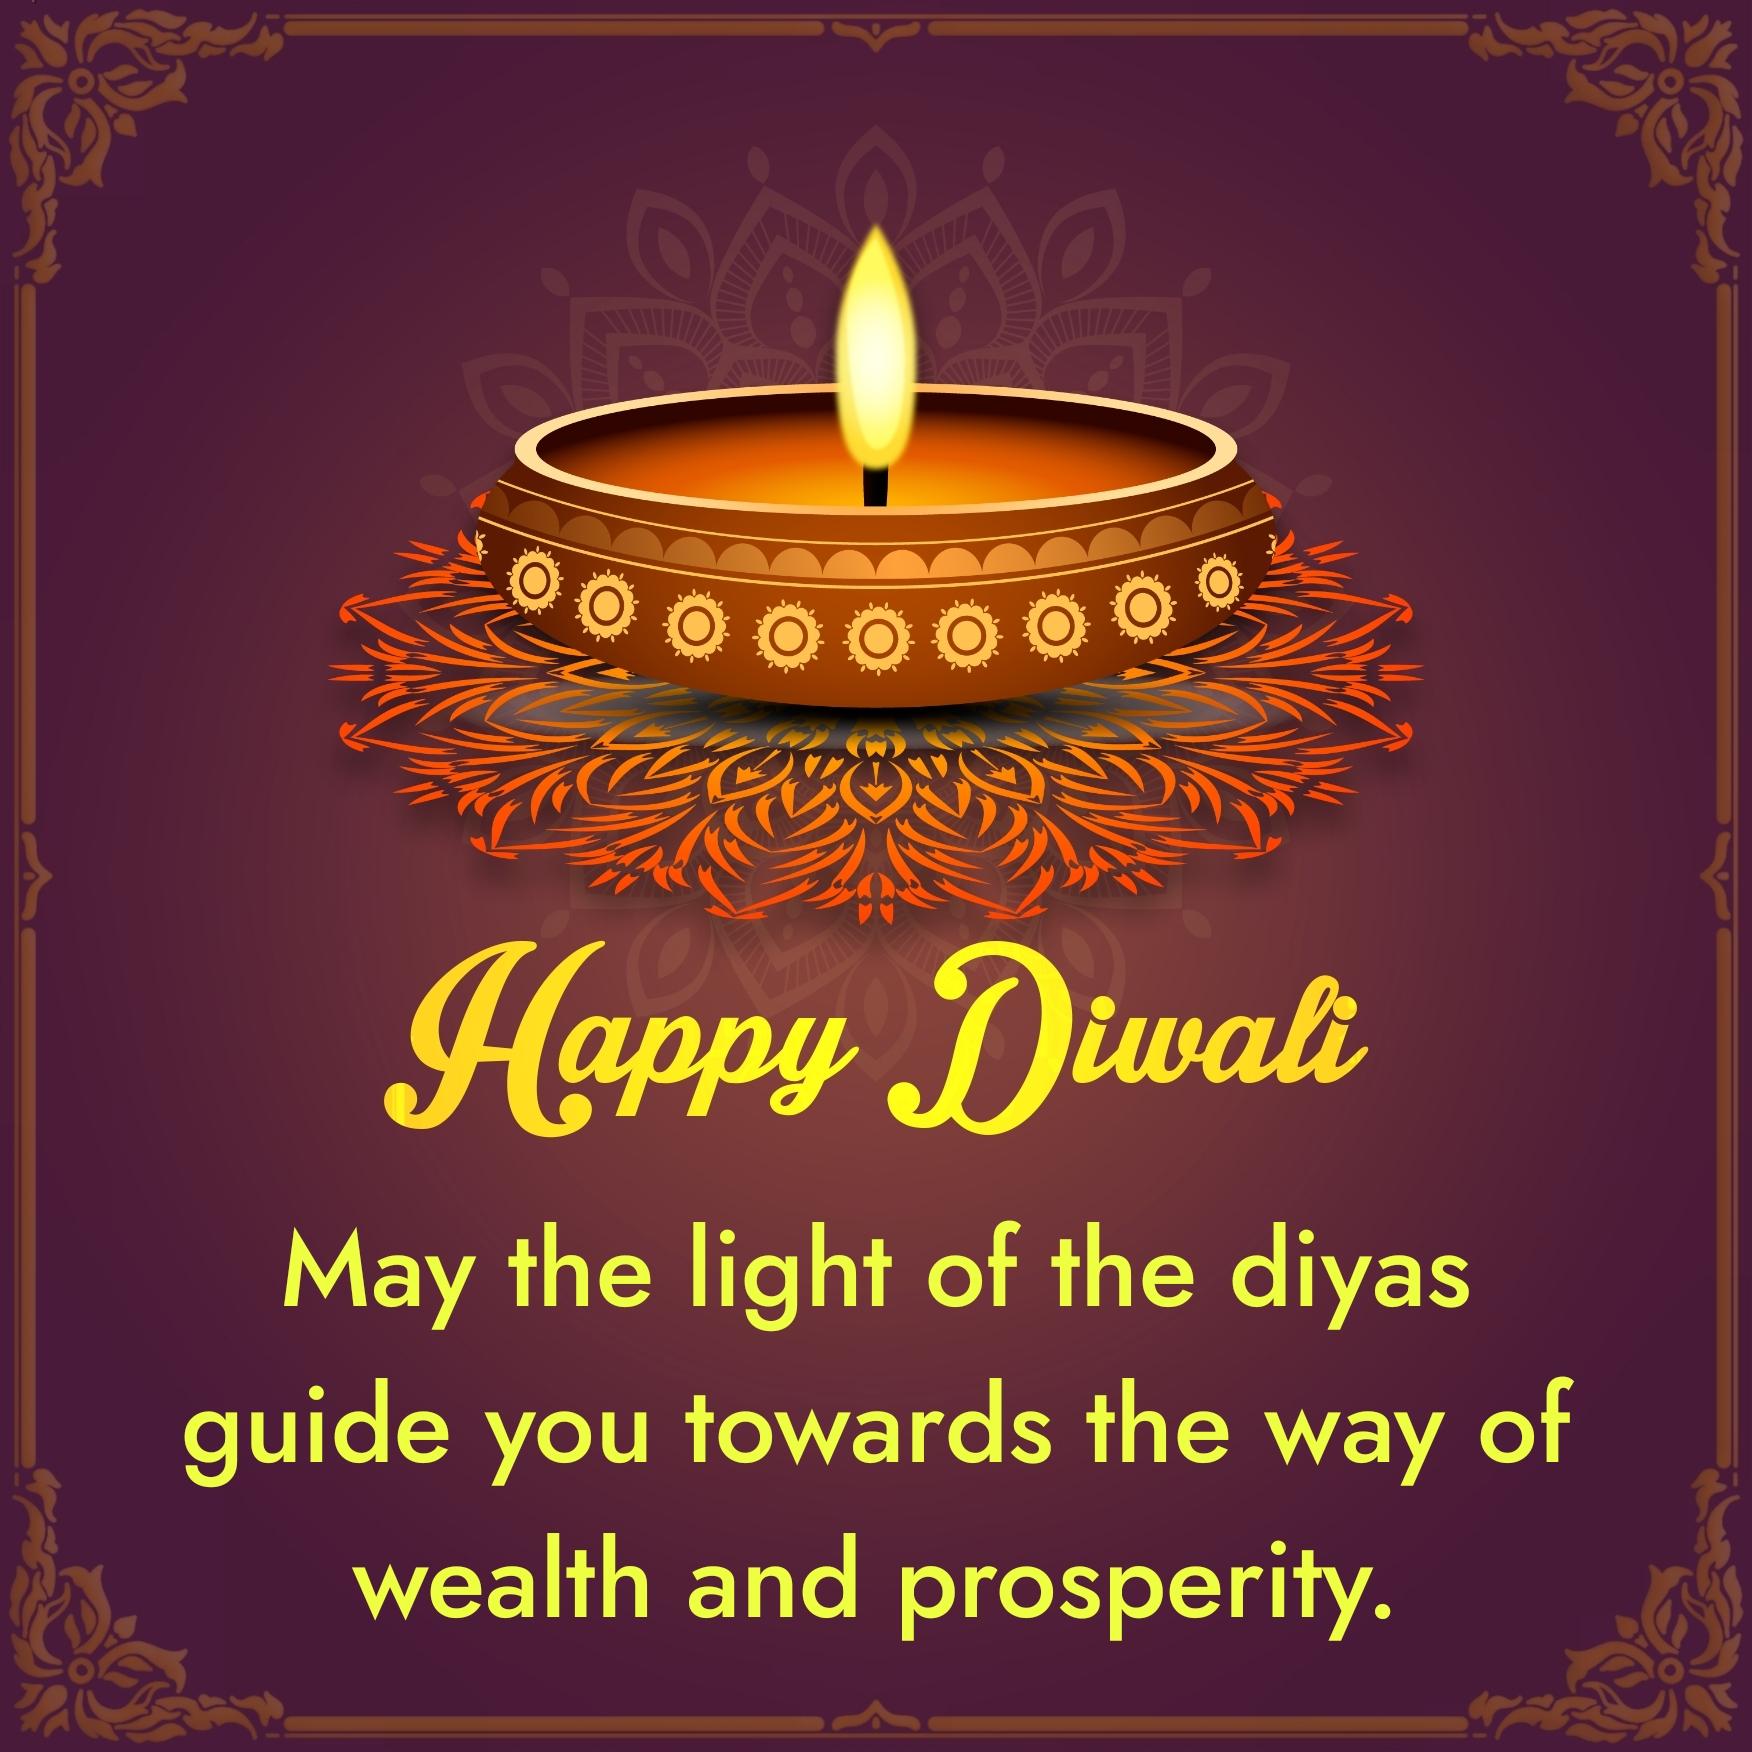 May the light of the diyas guide you towards the way of wealth